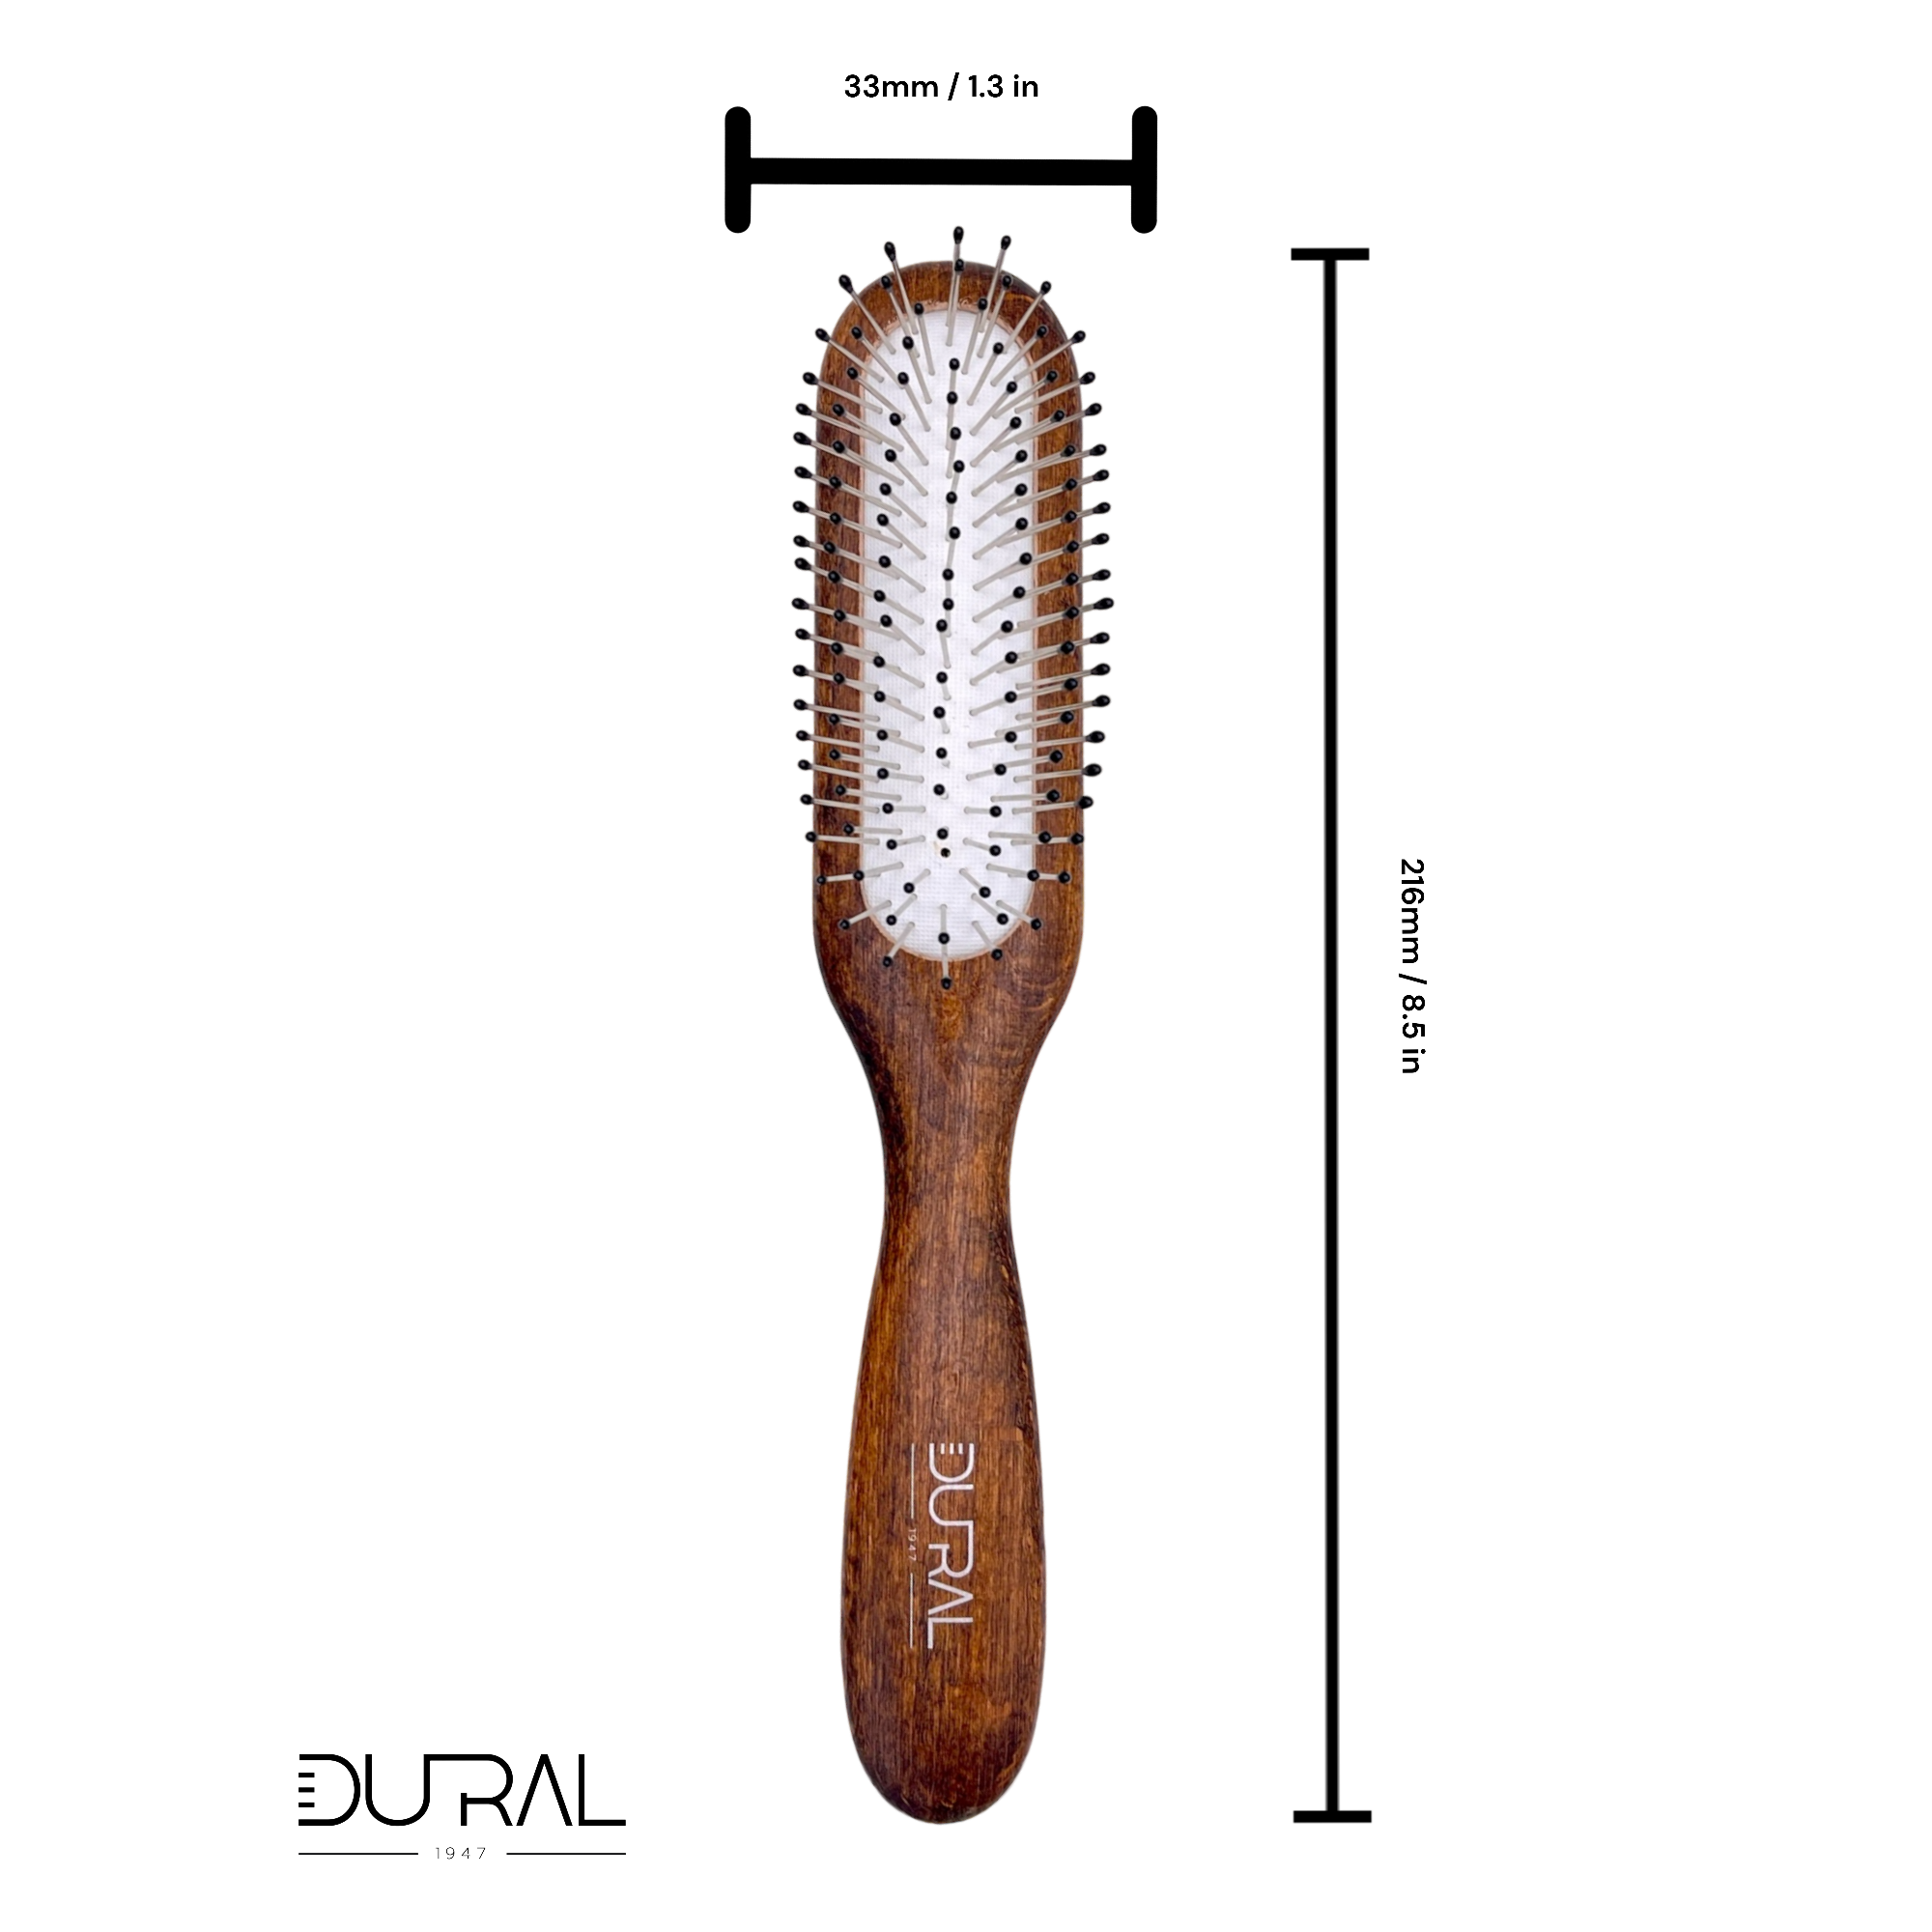 Dural Beech wood rubber cushion hair brush with steel pins and ball tips